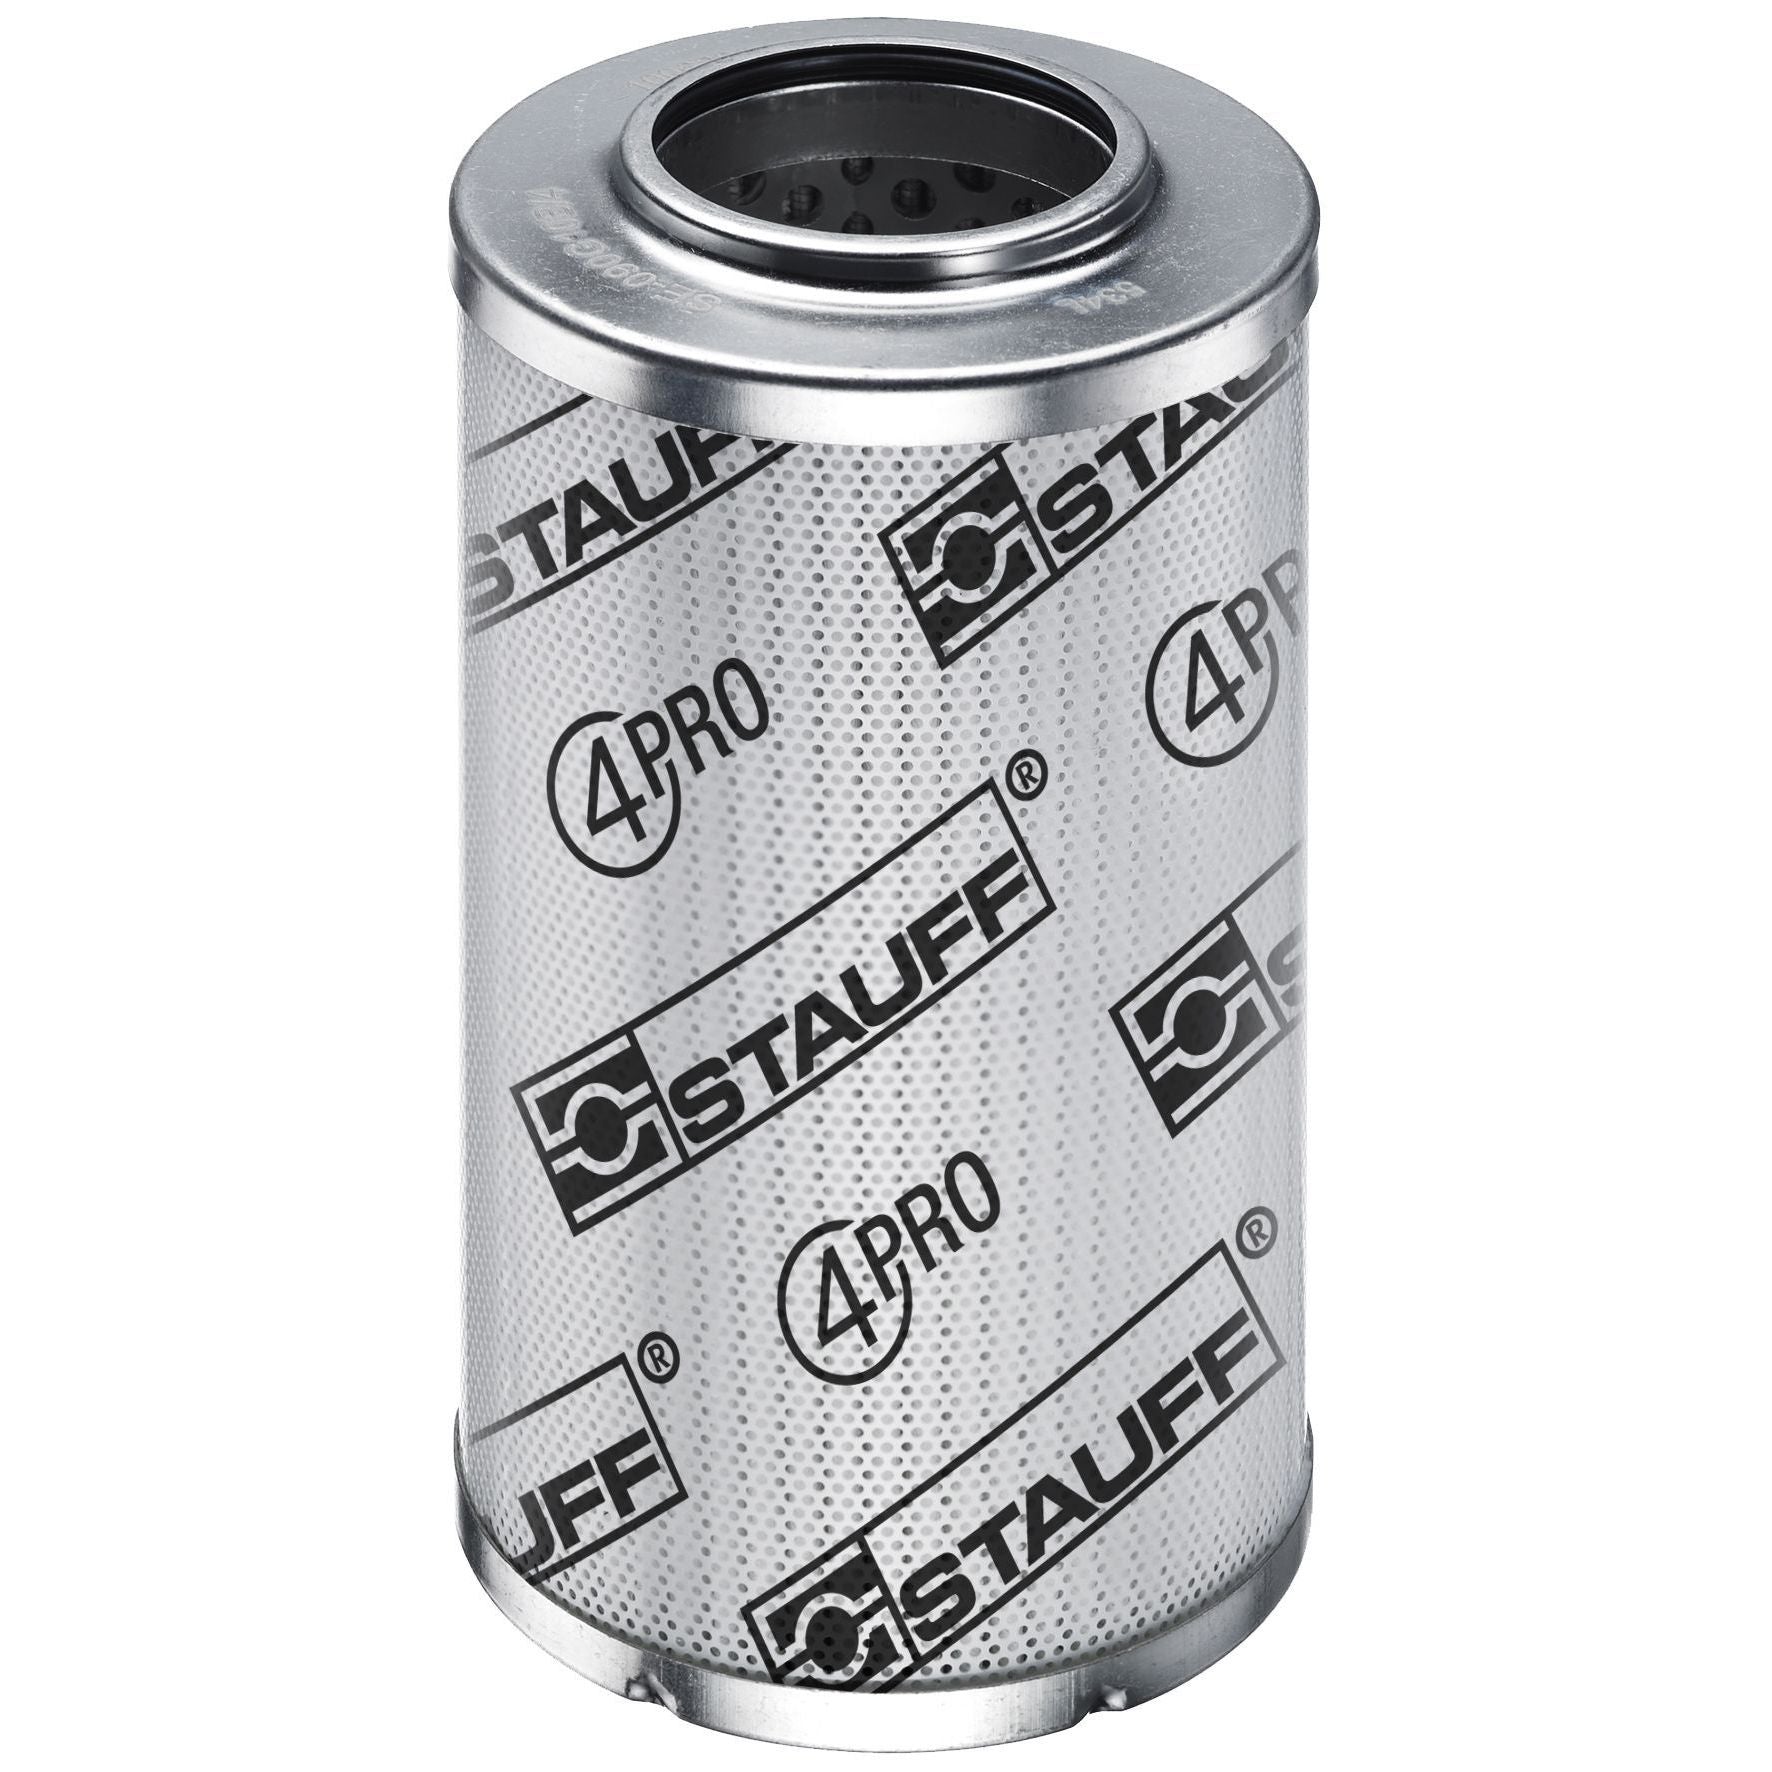 SE-070-H-03-B-N1/4 : Stauff SF-070 Series Filter Element, 3 Micron, Synthetic, 3045psi Collapse Differential, Buna